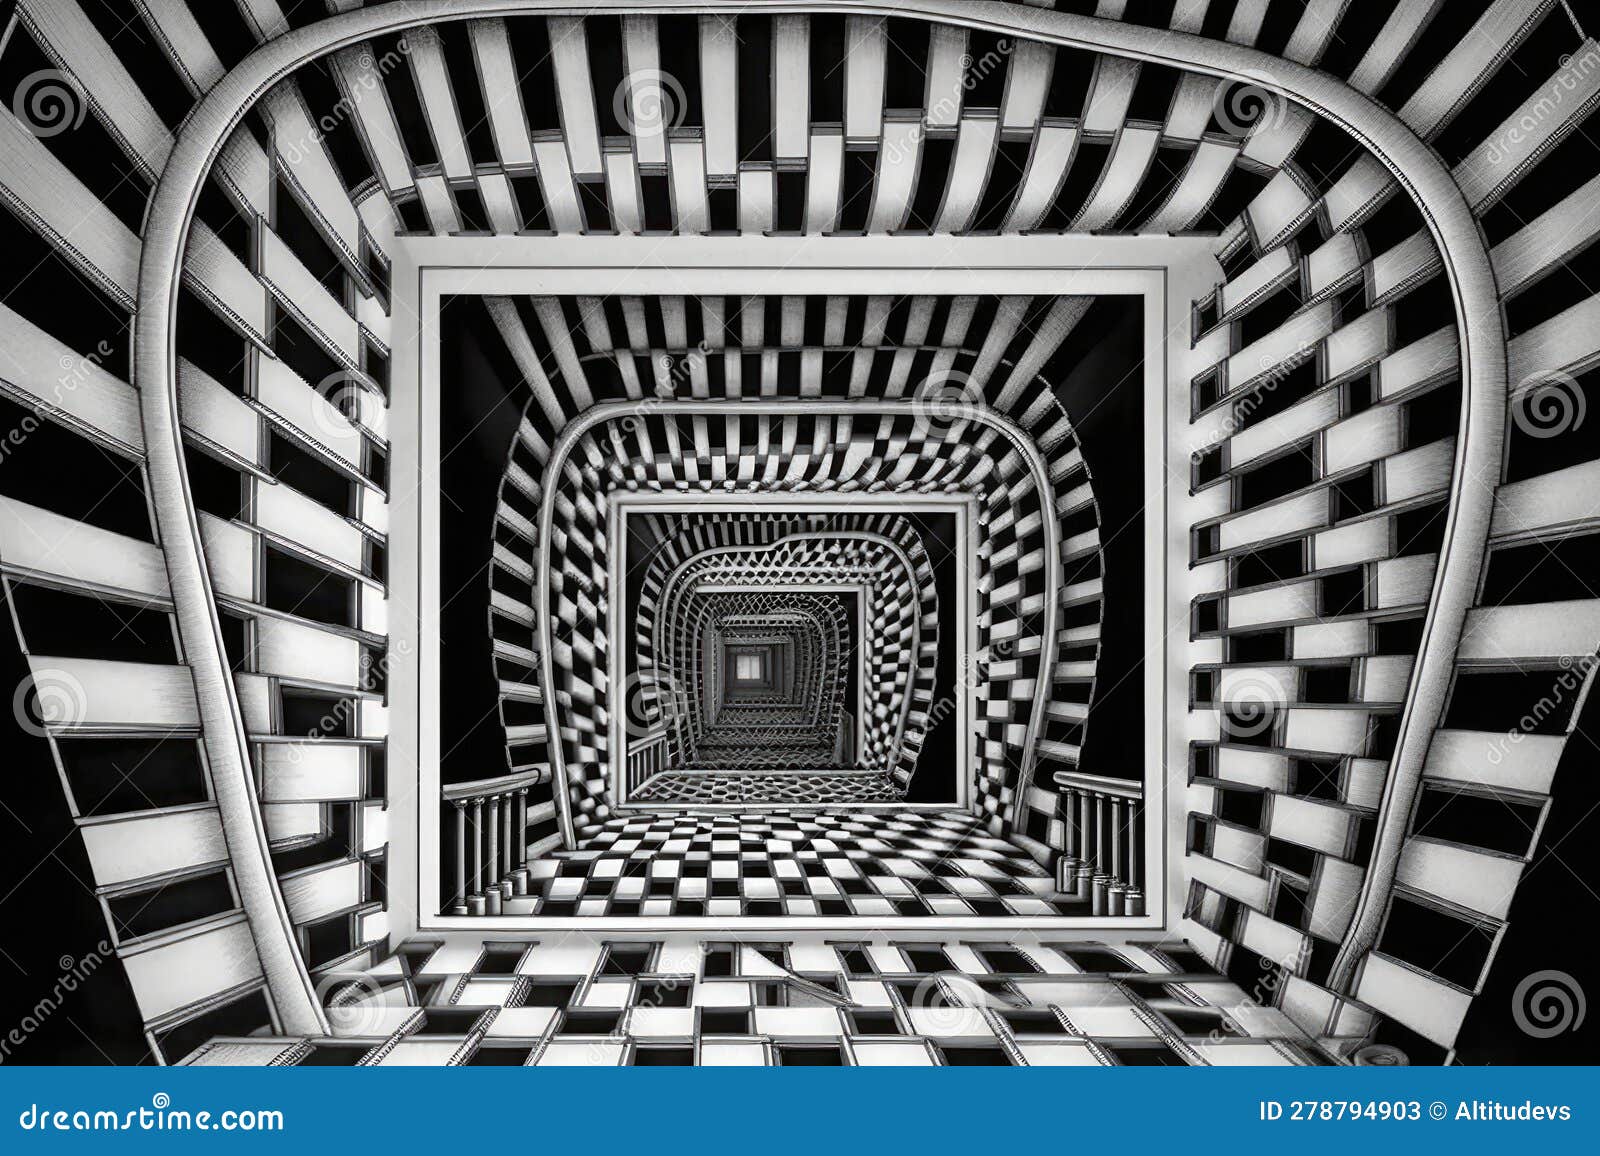 Optical Illusion of a Moving Staircase, with Each Step Appearing To ...